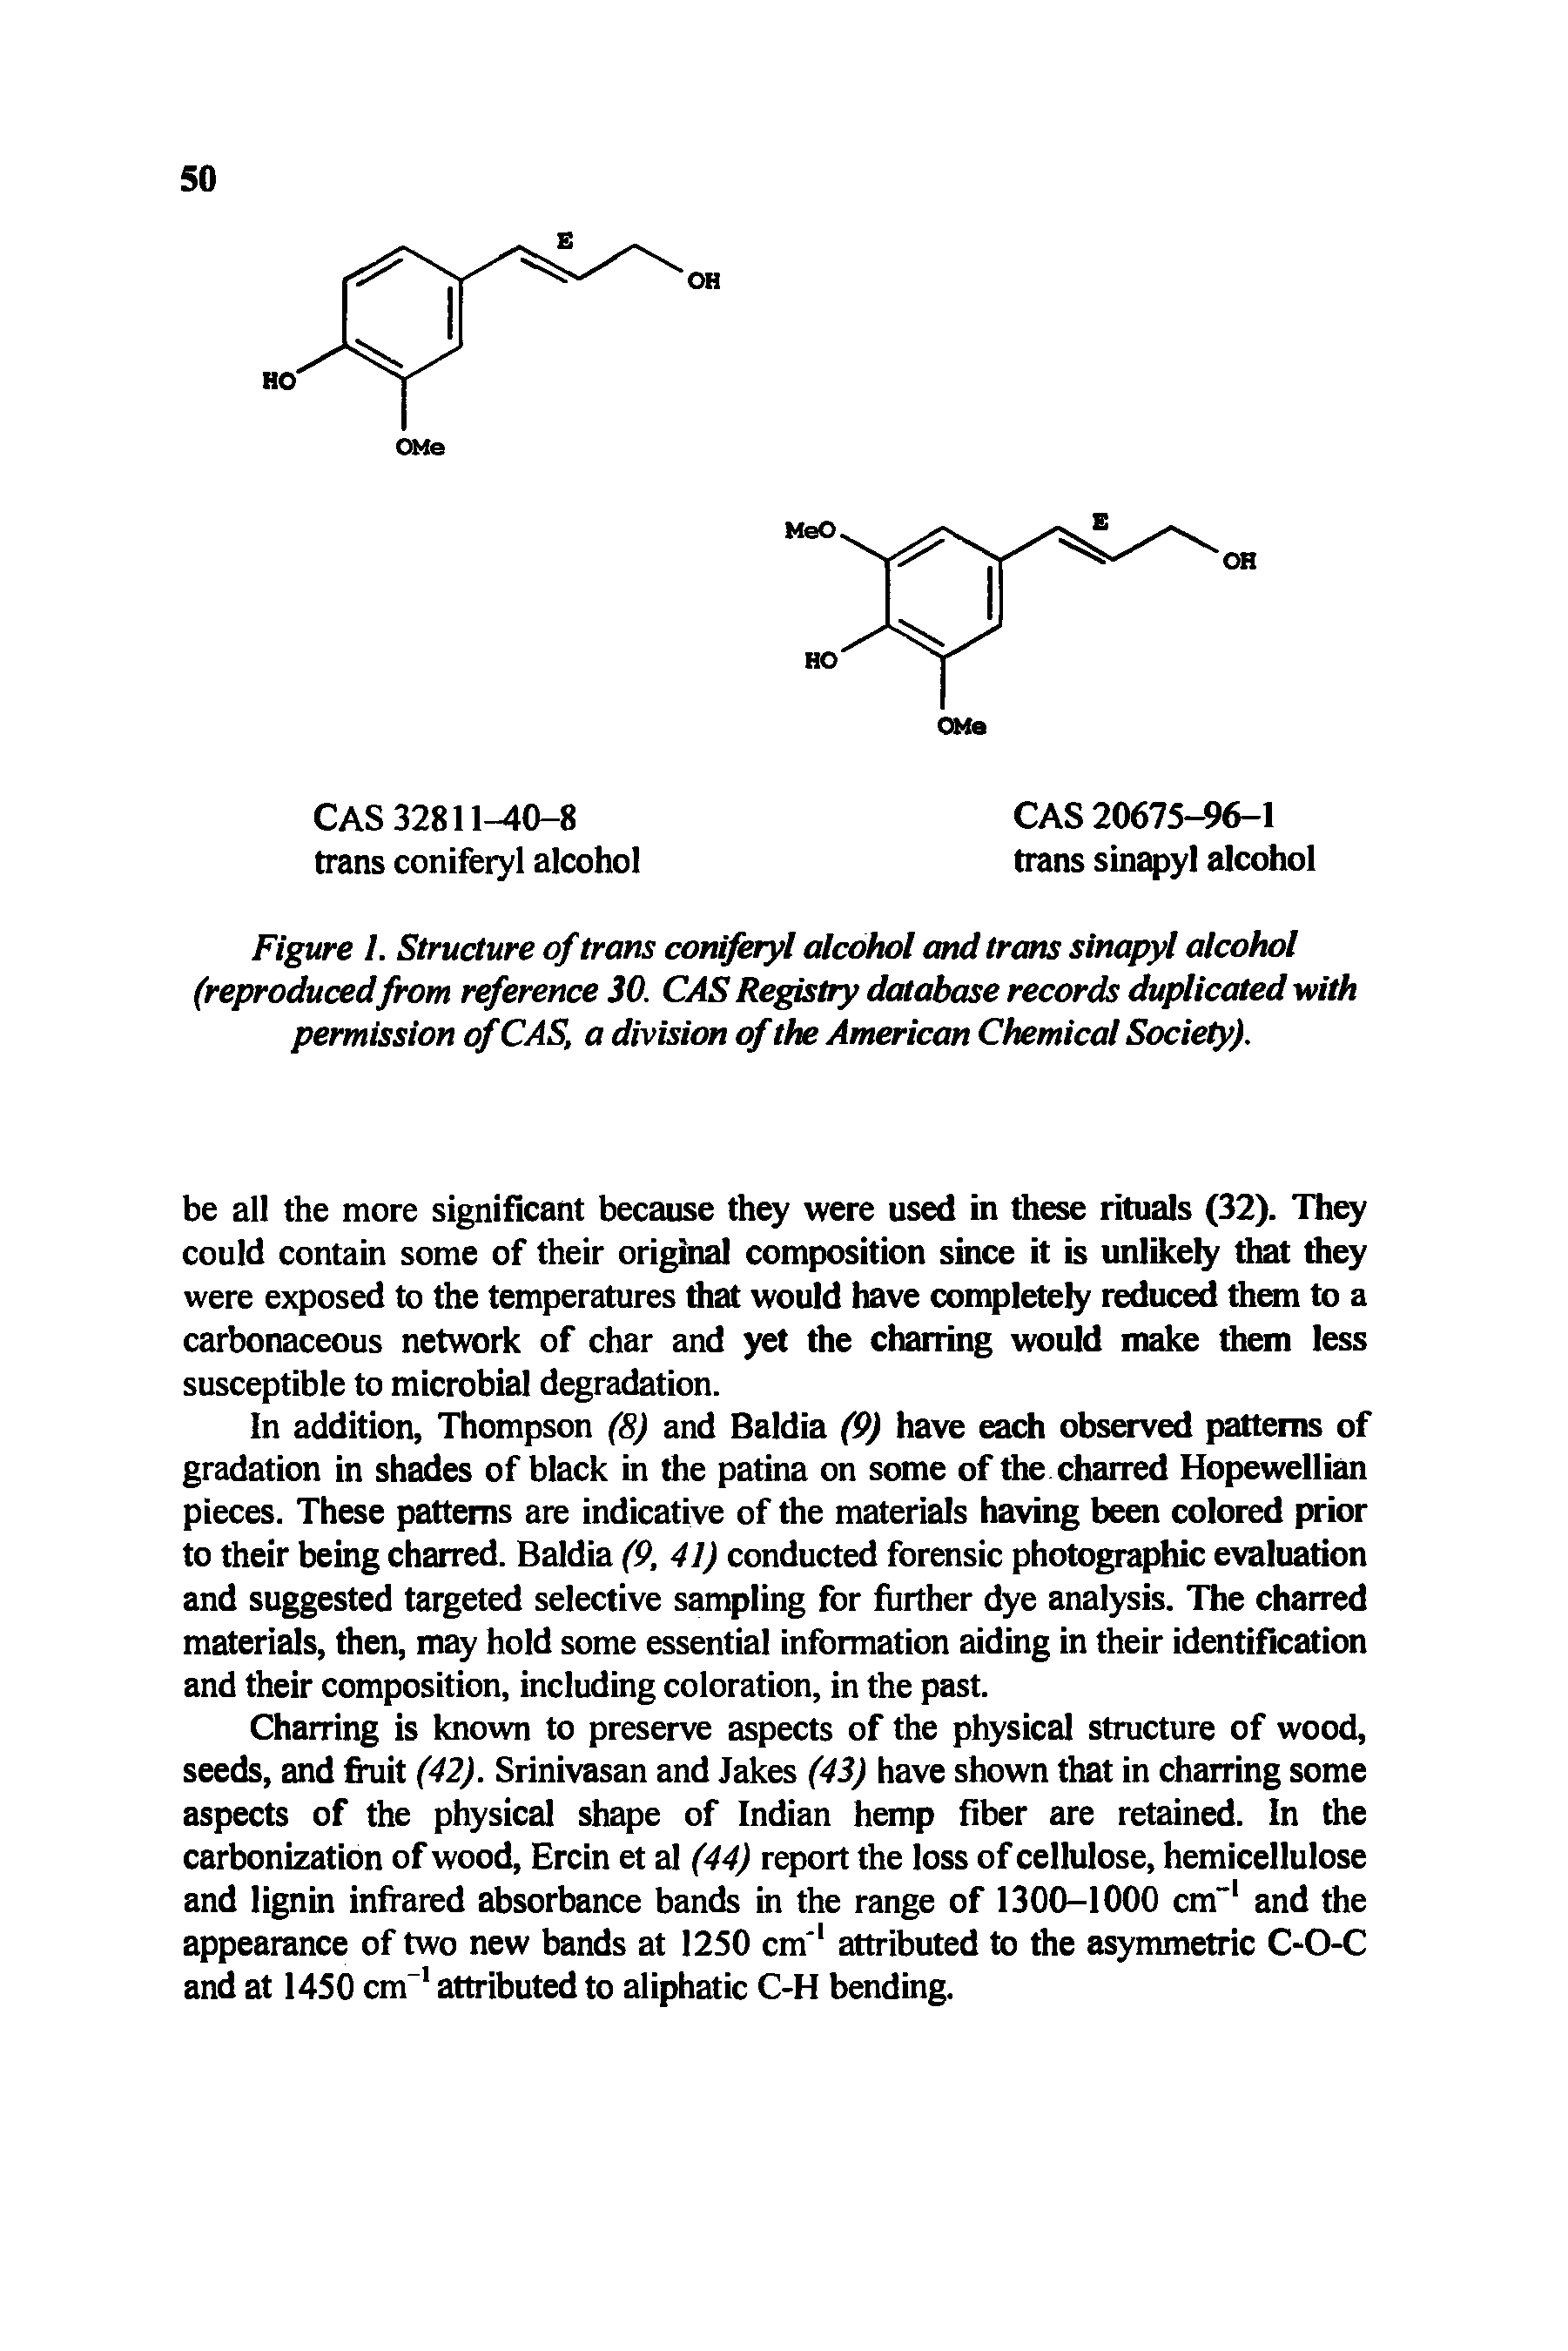 Figure 1. Structure of trans coniferyl alcohol and trans sinapyl alcohol (reproducedfrom reference 30. CAS Registry database records duplicated with permission of CAS, a division of the American Chemical Society).